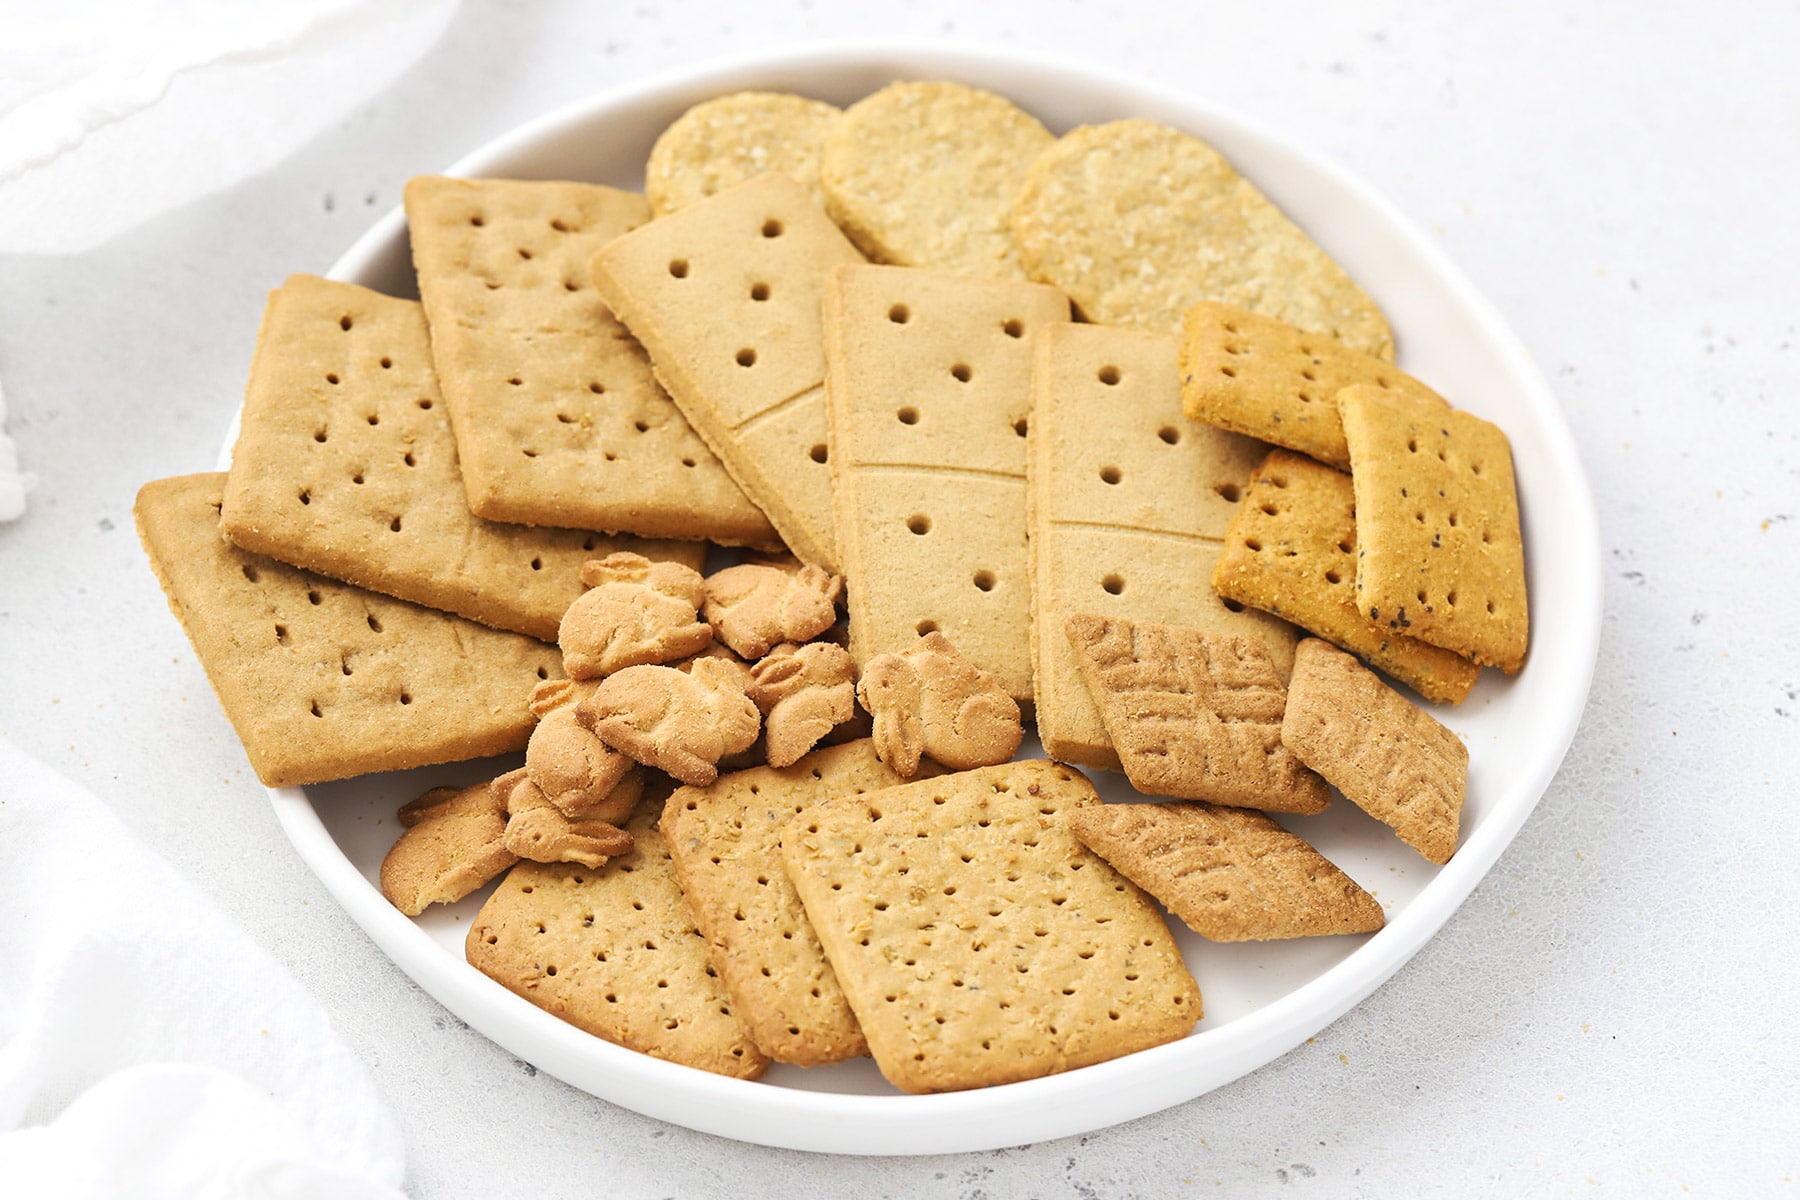 gluten-free graham crackers on a plate